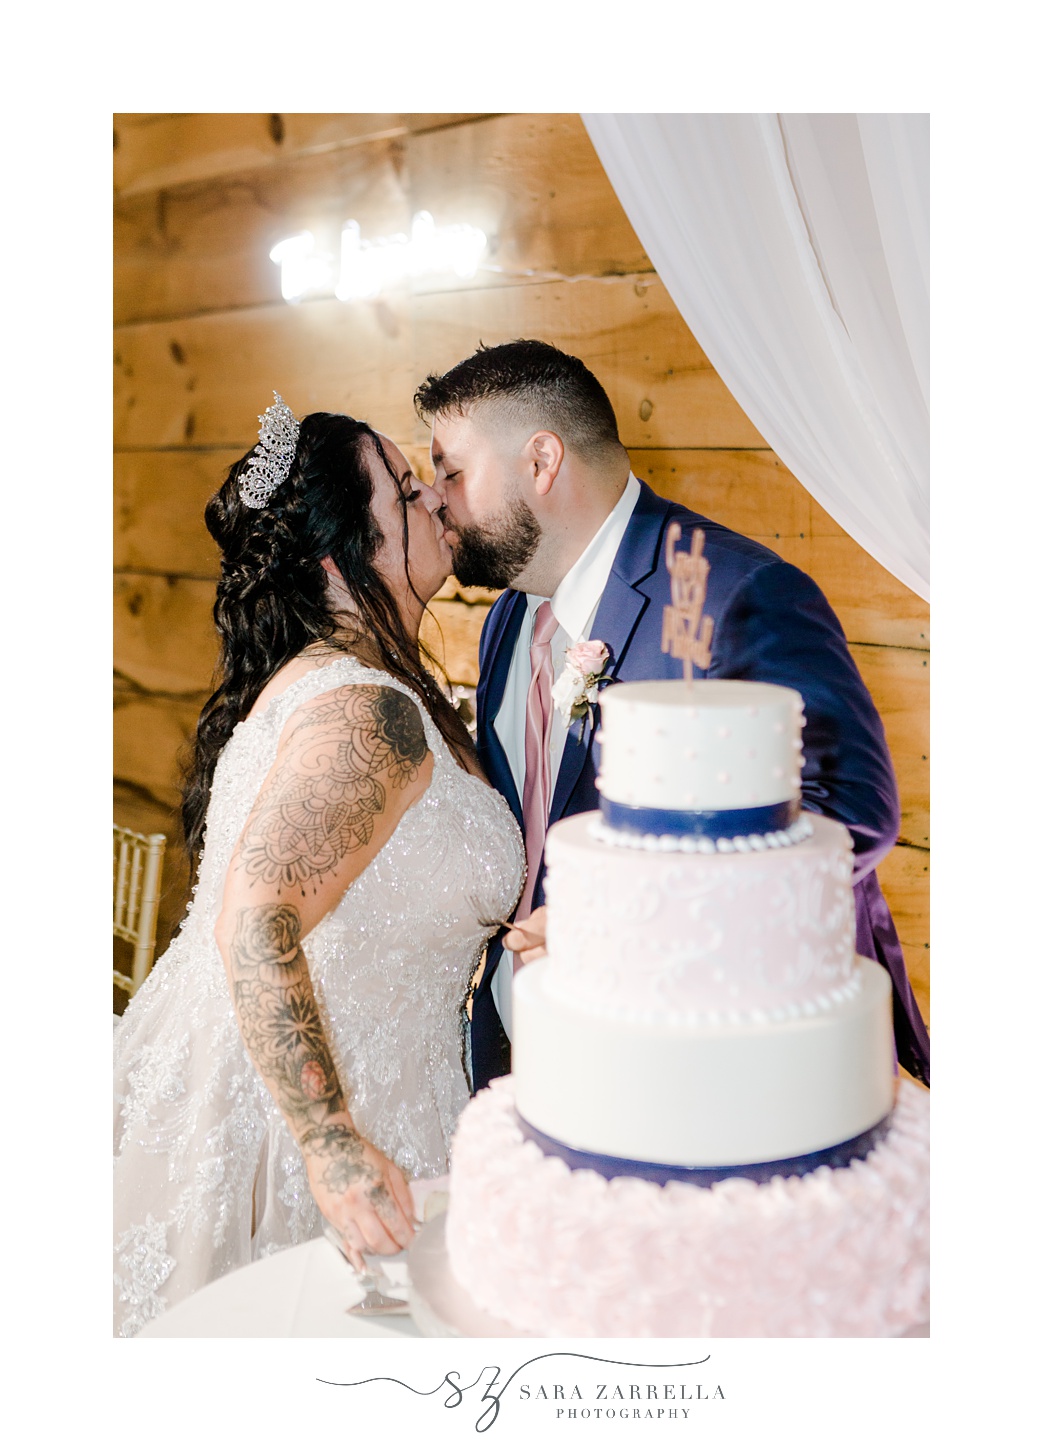 newlyweds cut tiered wedding cake with pink icing and blue ribbons